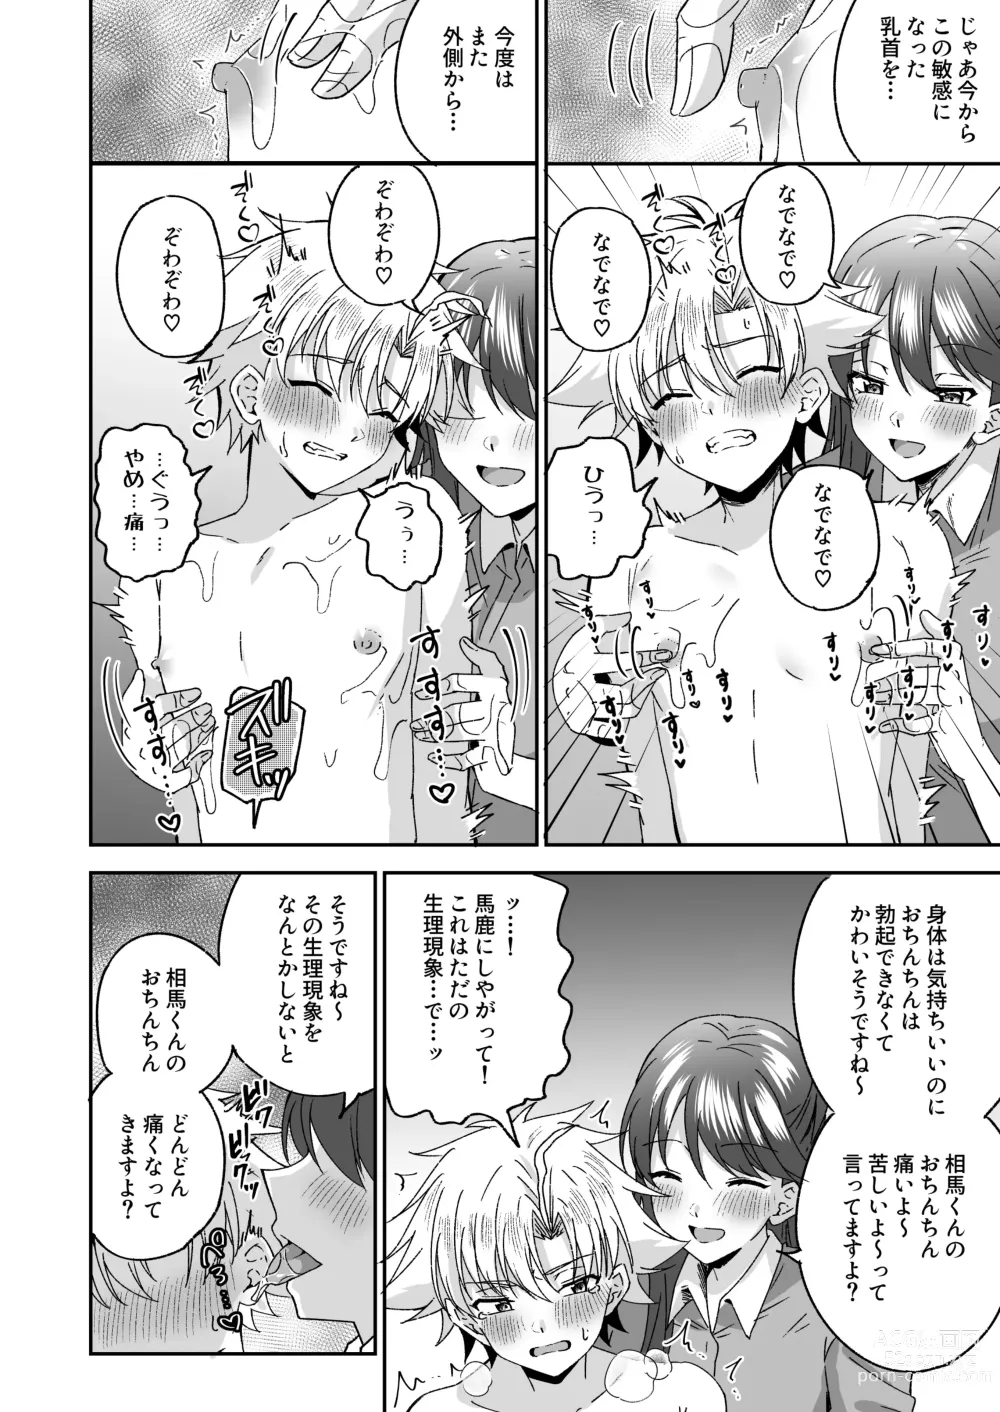 Page 23 of doujinshi A story about a delinquent boy who gets chastity belt ejaculation control reverse anal sex by a female teacher who is a nymphomaniac